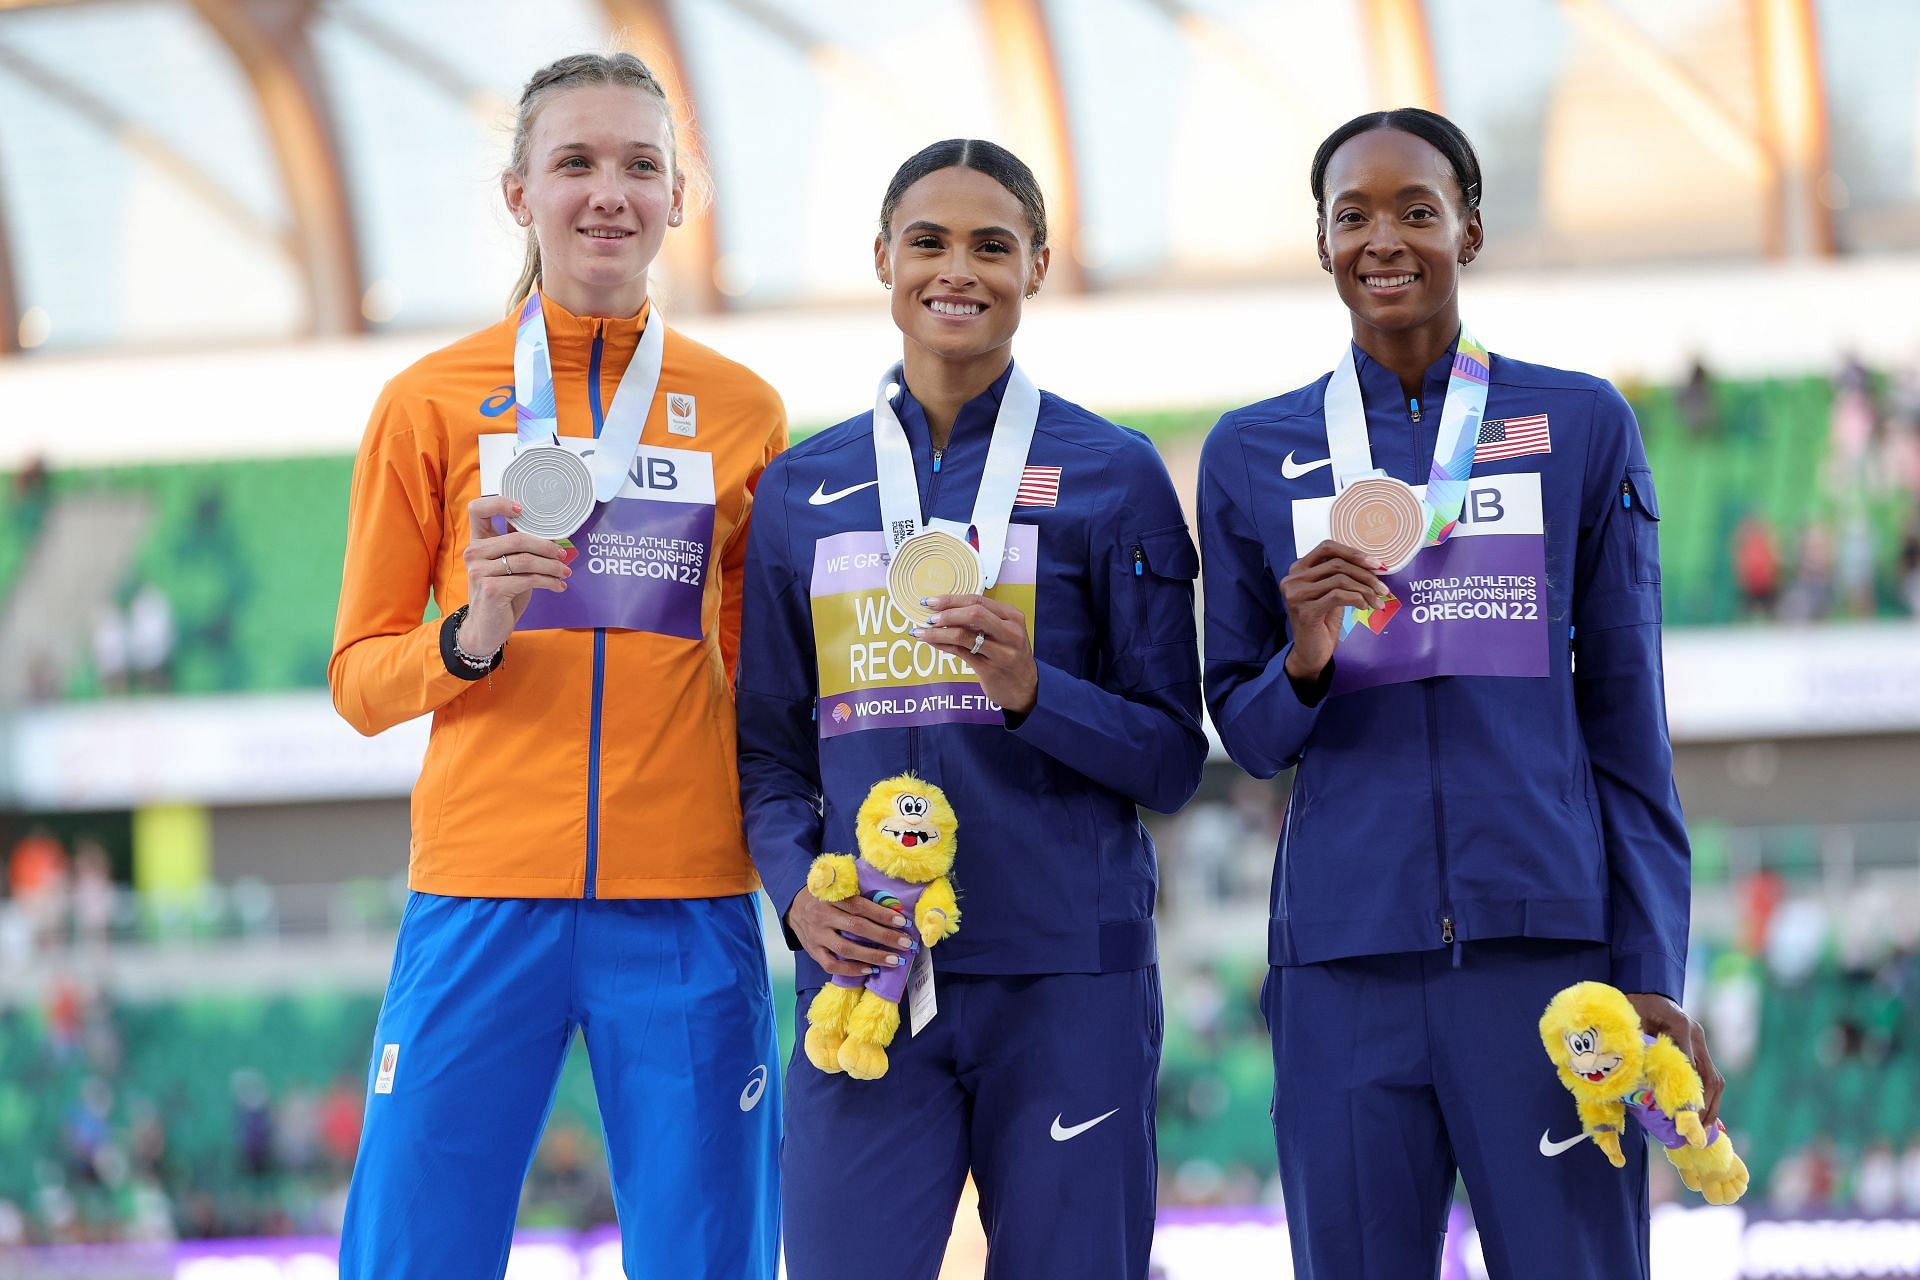 Femke Bol (L), Sydney McLaughlin (C) and Dalilah Muhammad (R) during the medal ceremony for the Women&#039;s 400m Hurdles Final at the World Athletics Championships Oregon22. (Photo by Carmen Mandato/Getty Images)